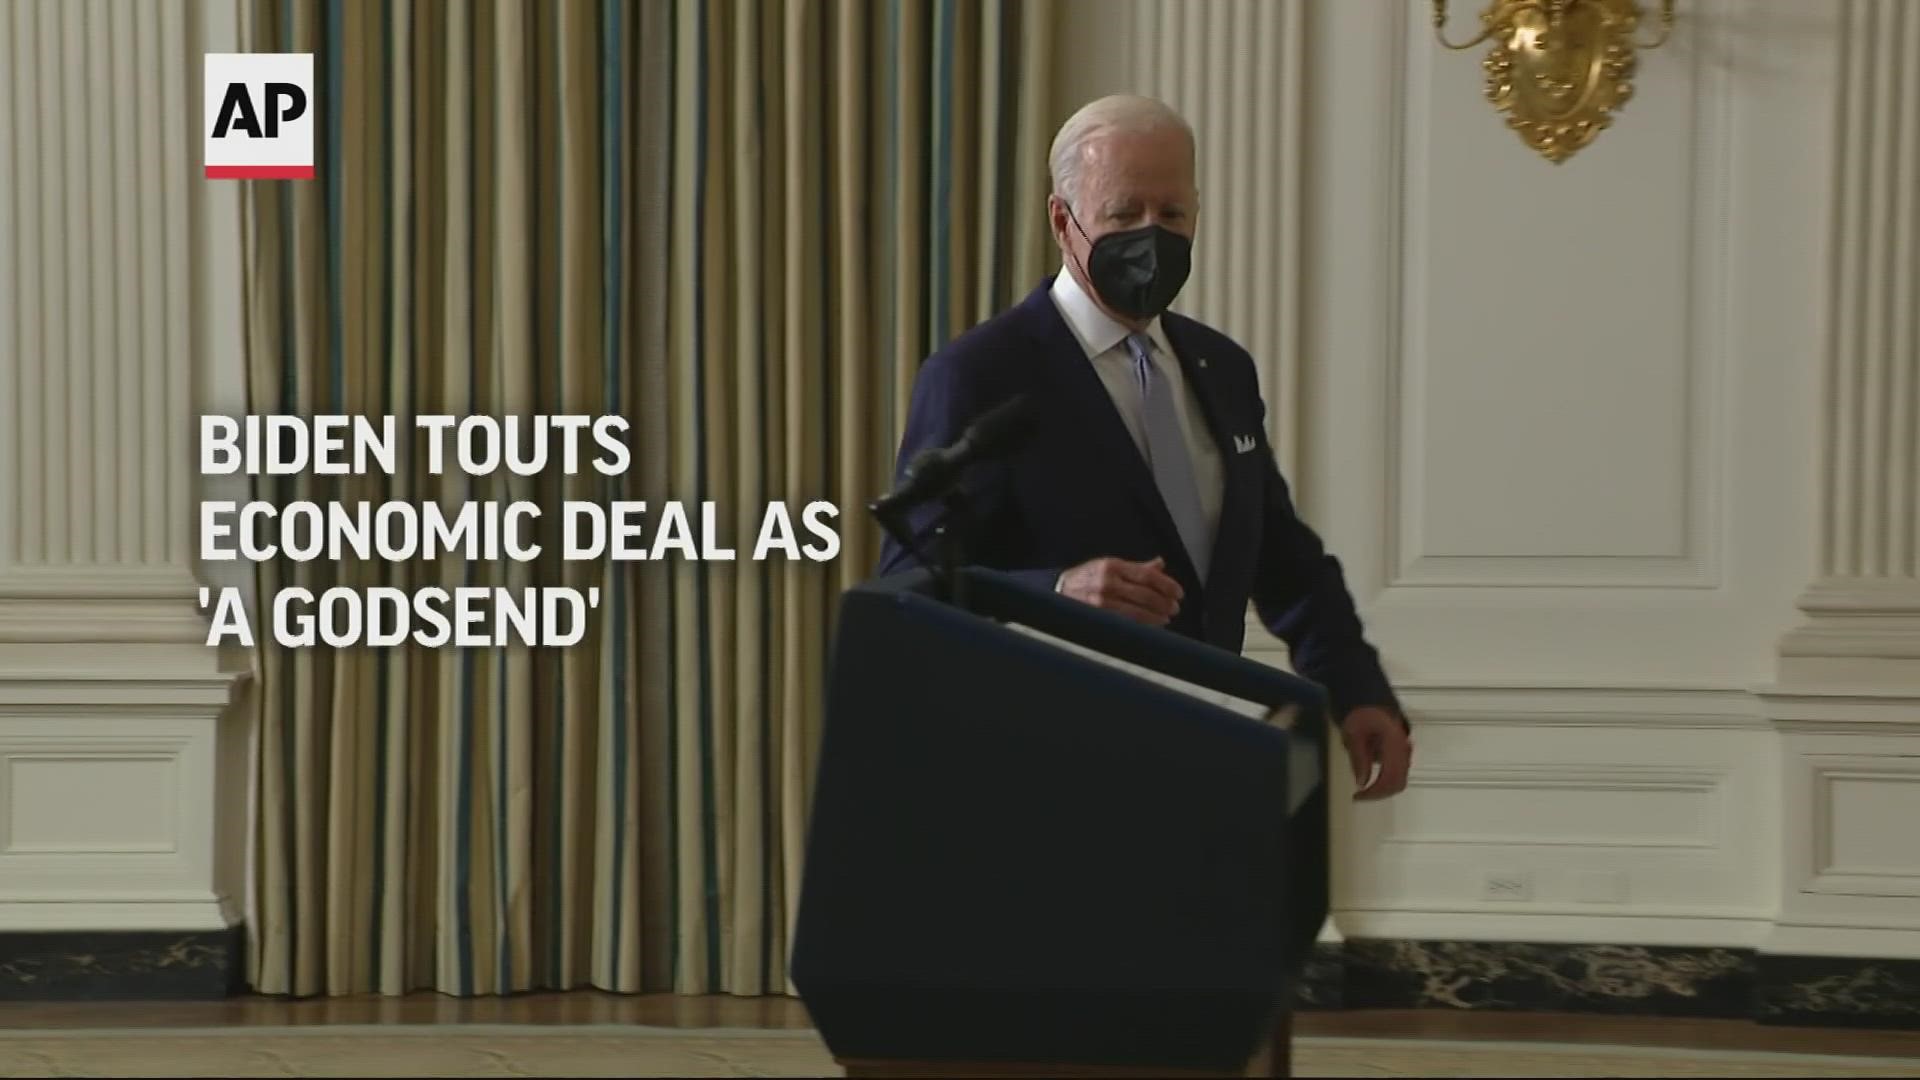 Biden declared his support Thursday for the "historic" inflation-fighting agreement struck by Senate Majority Leader Chuck Schumer and Democratic Sen. Joe Manchin.